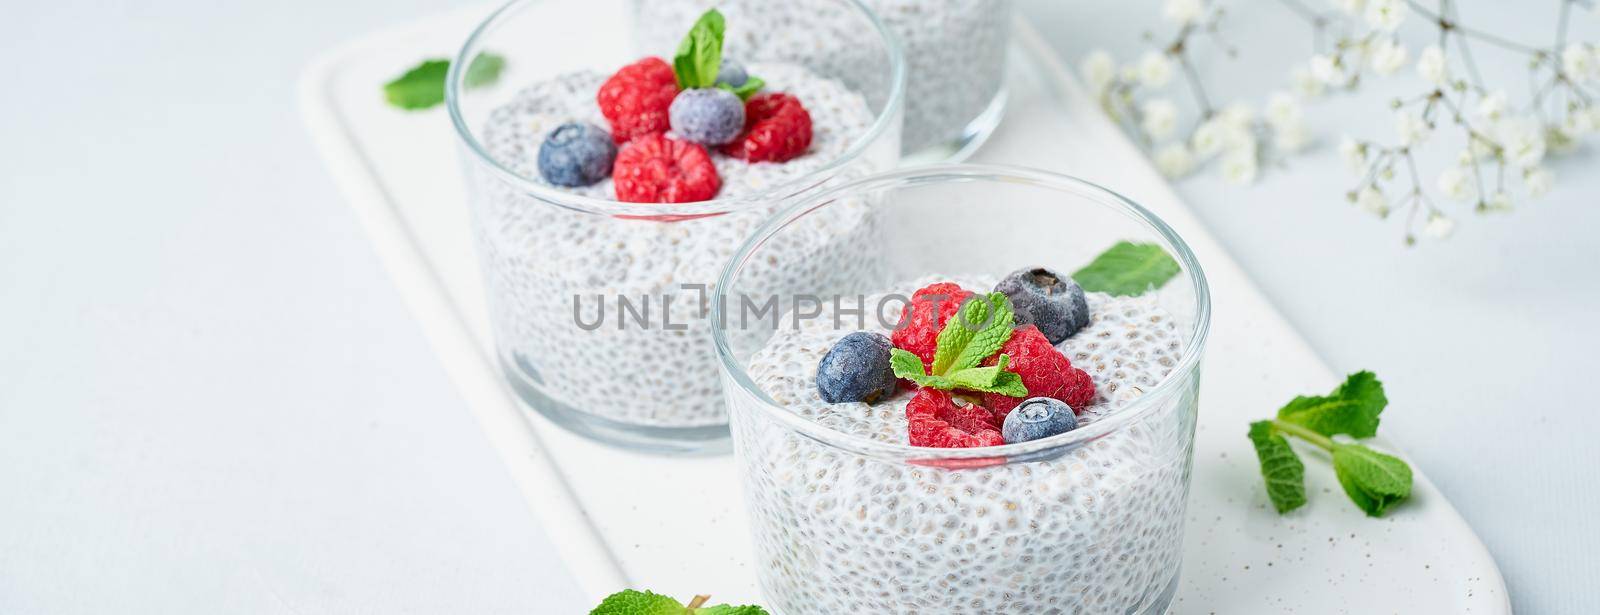 Banner with chia pudding with fresh berries raspberries, blueberries by NataBene